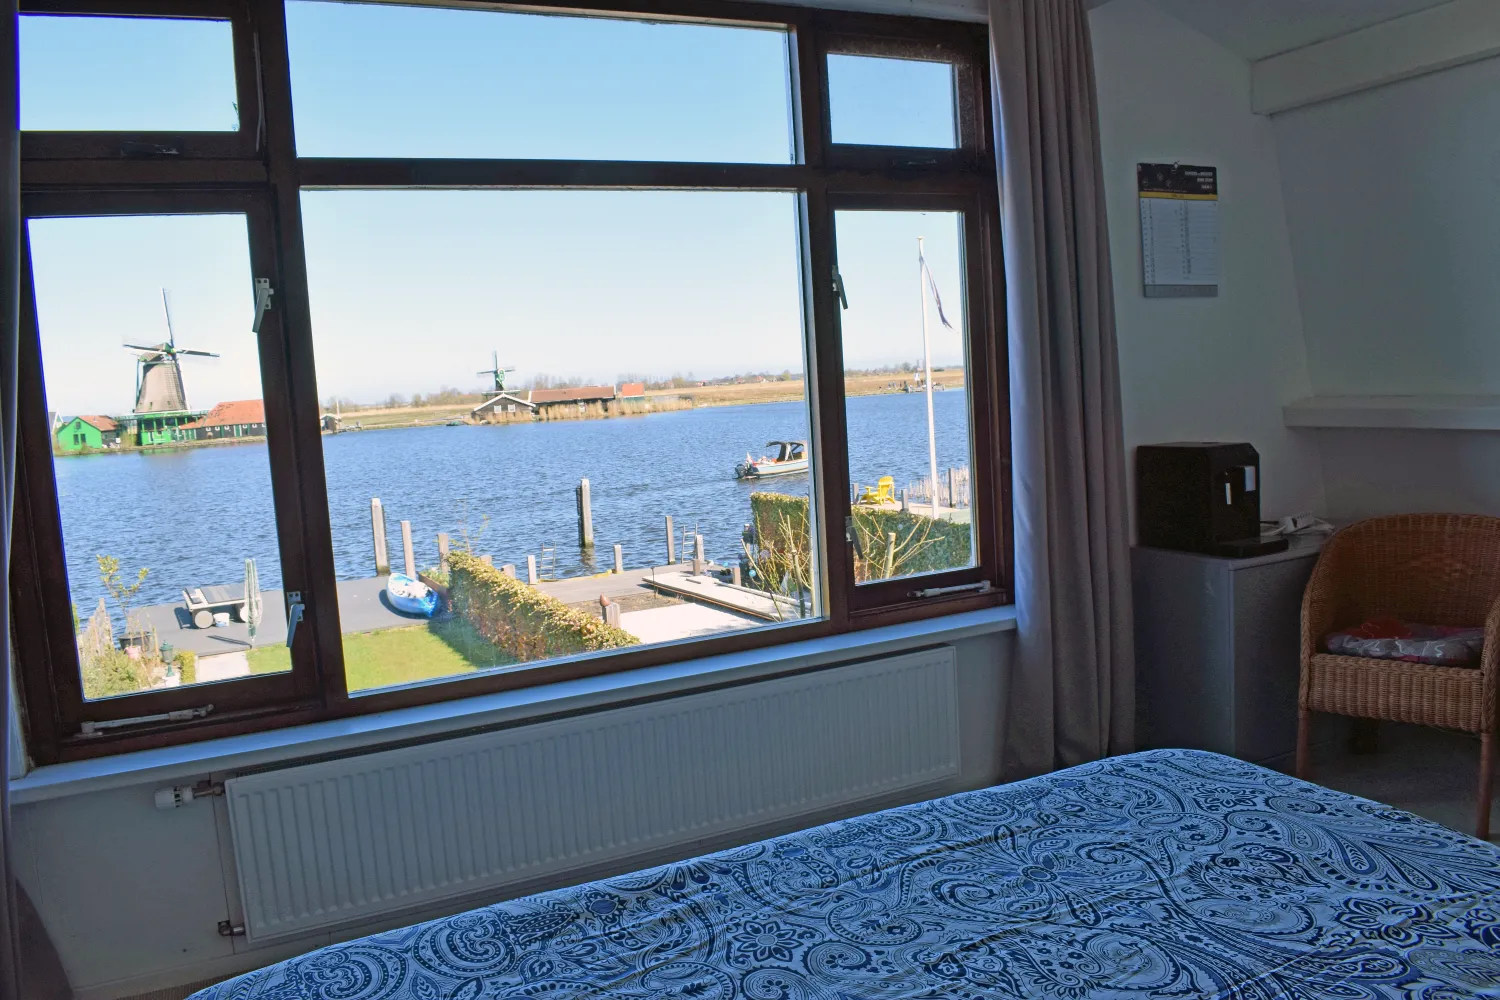 Luxury room with view at windmills